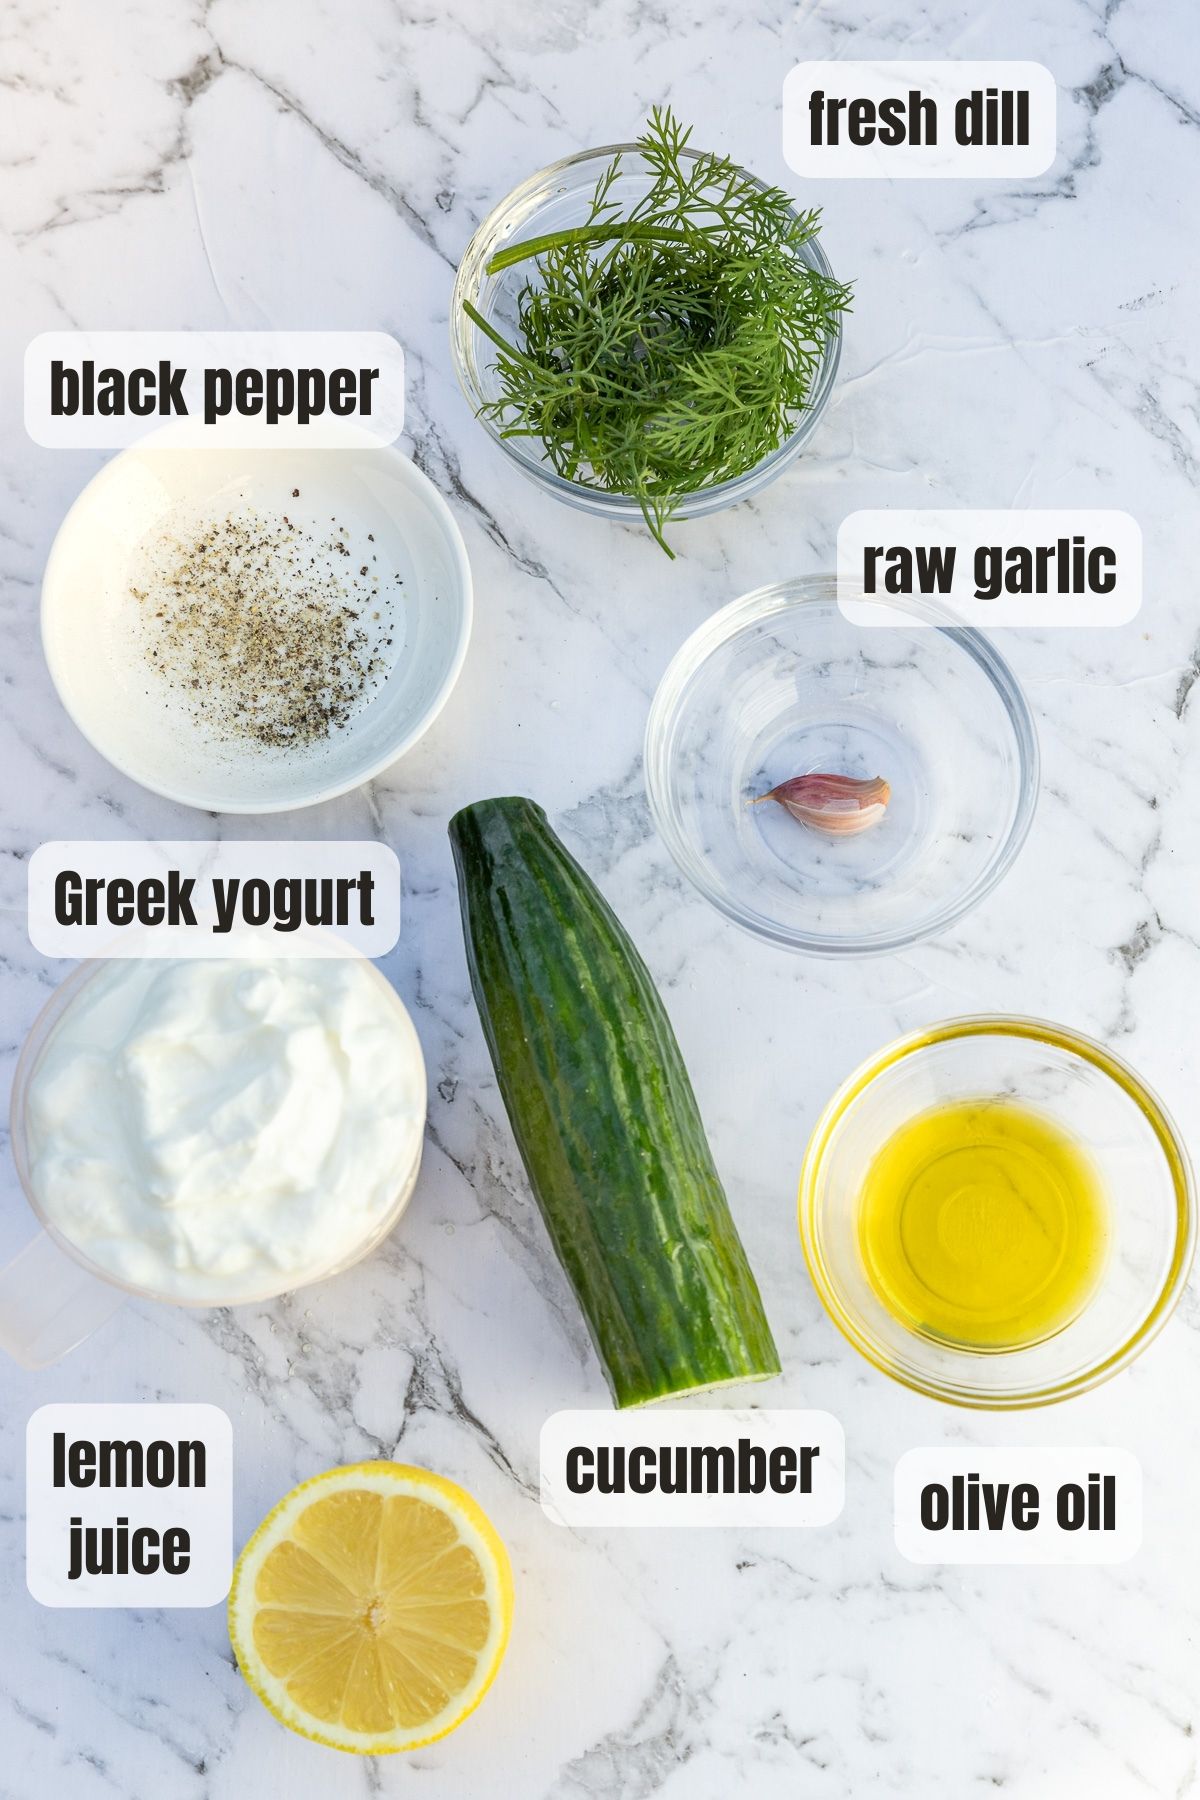 All the ingredients for tzatziki labelled on a marble background including Greek yogurt, lemon juice, cucumber, olive oil, black pepper, fresh dill and a garlic clove.